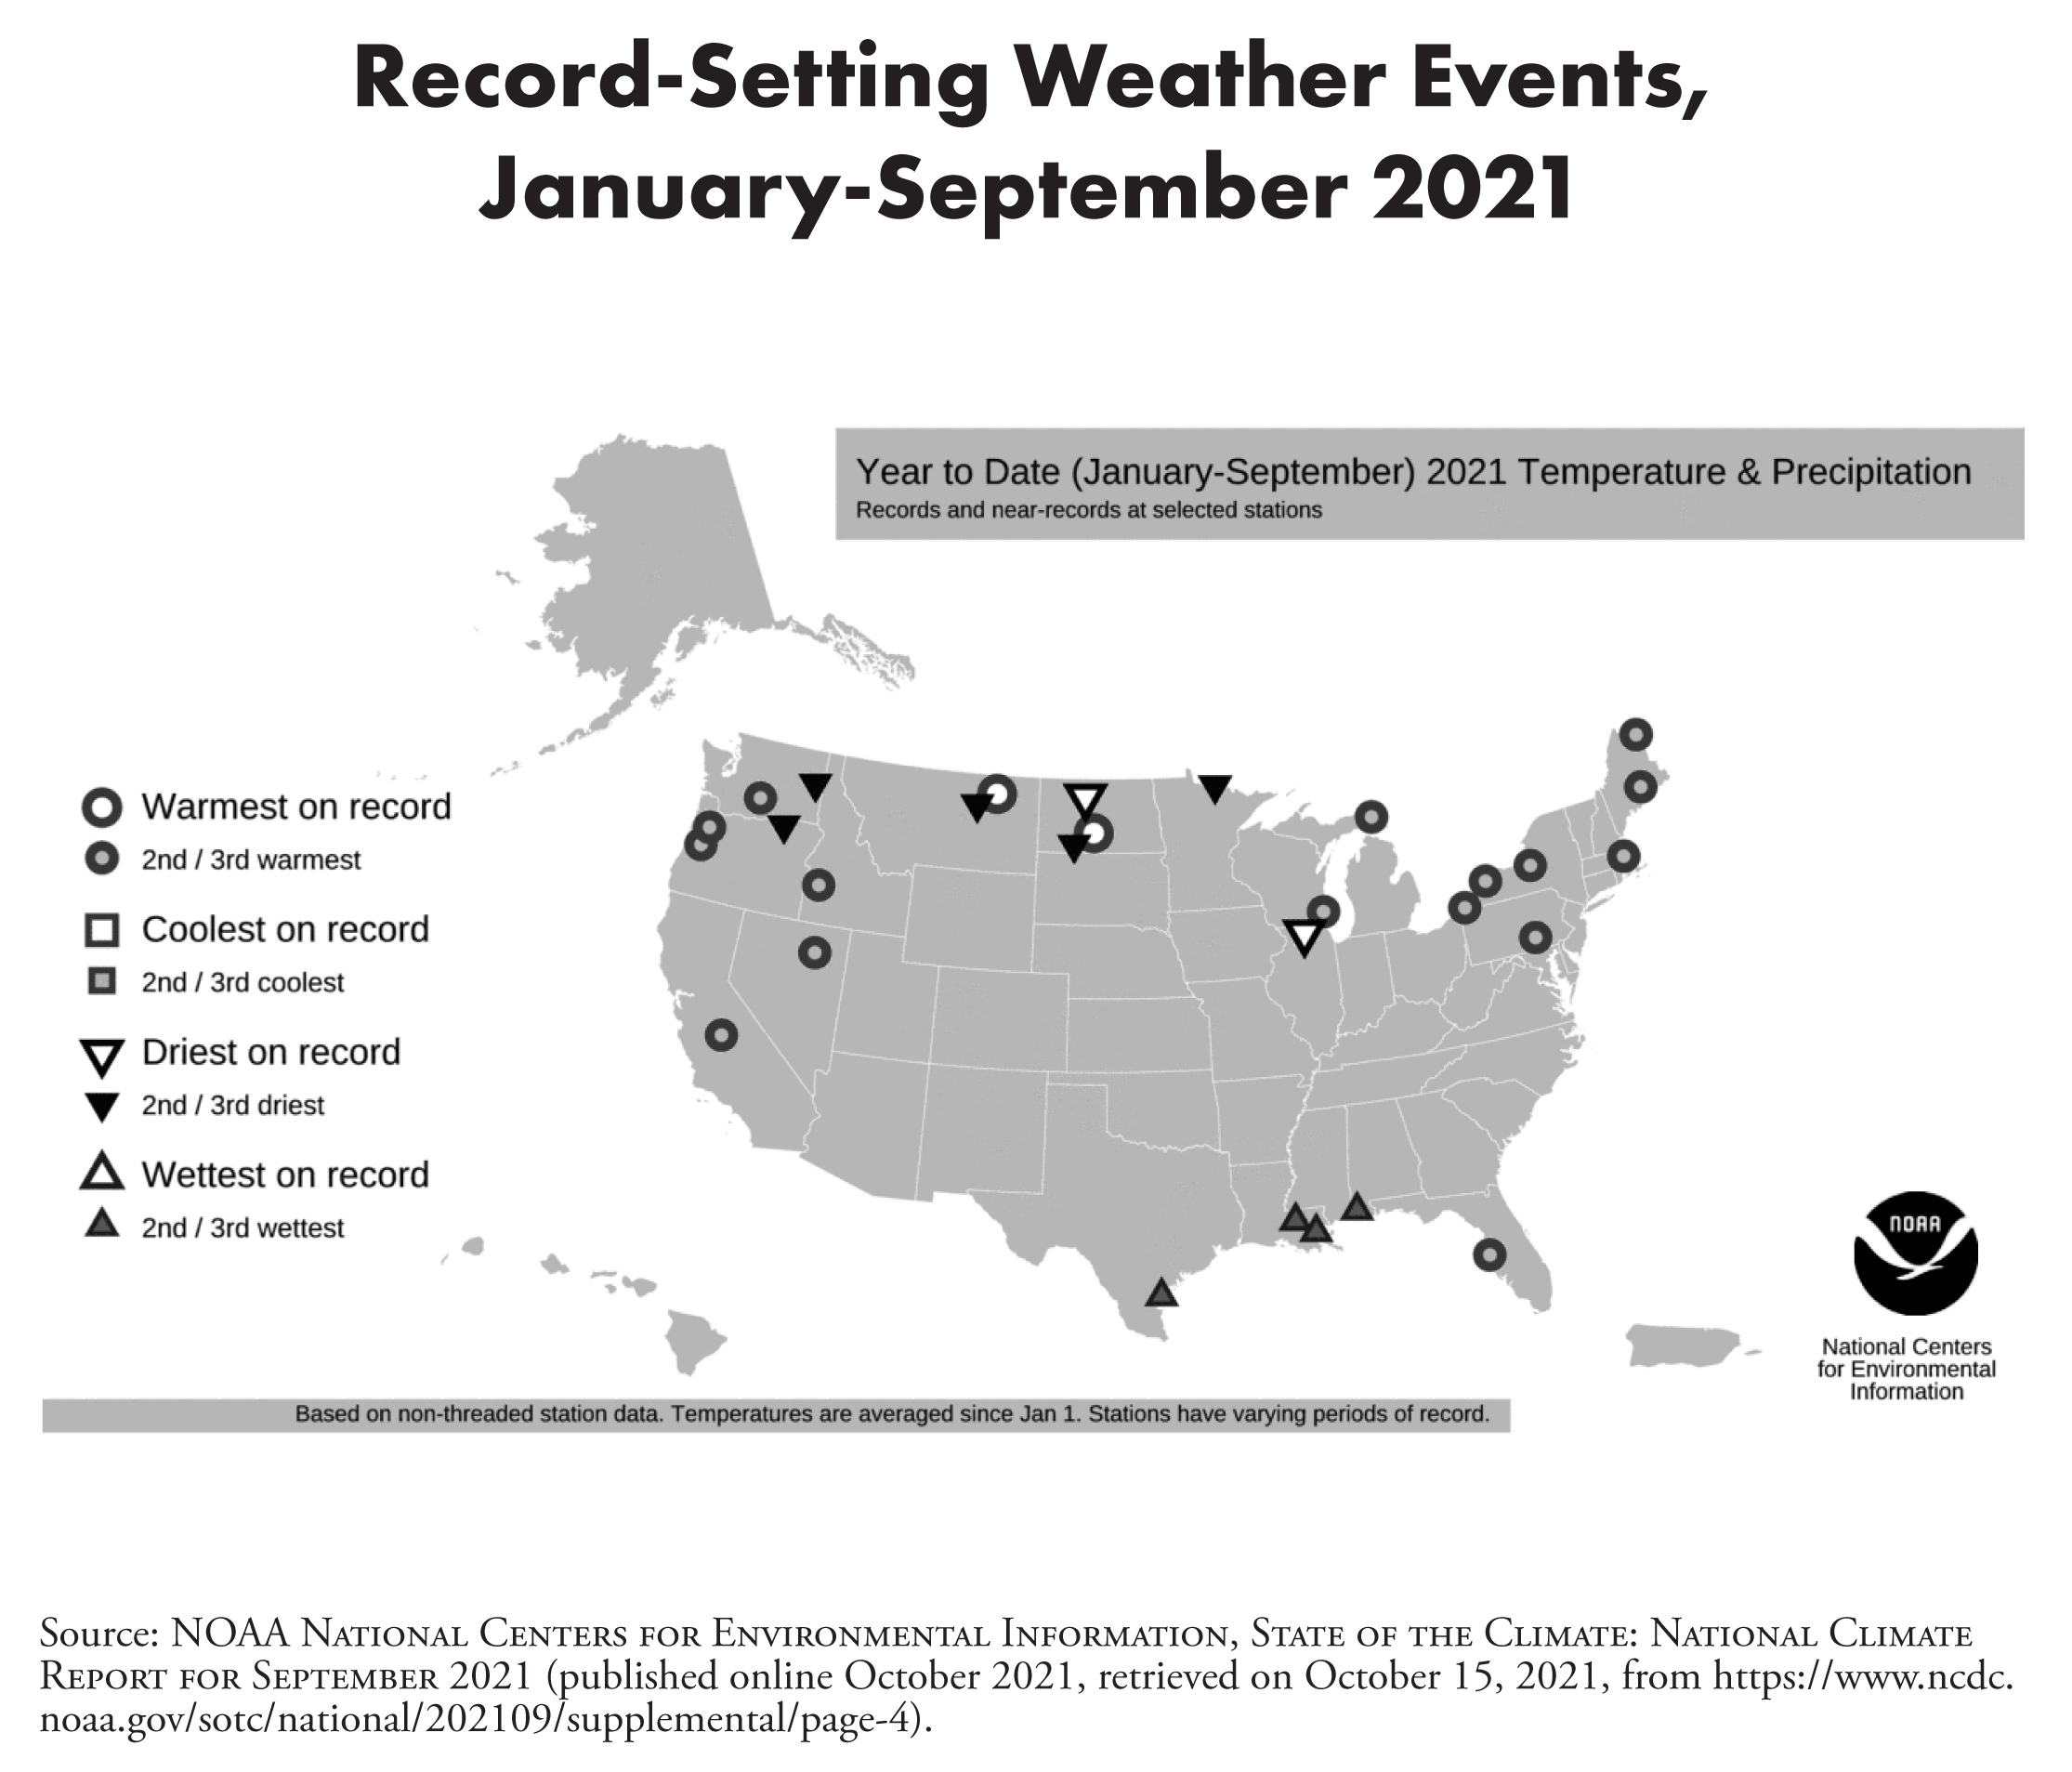 Record-Breaking Weather Events, Jan-Sep 2021